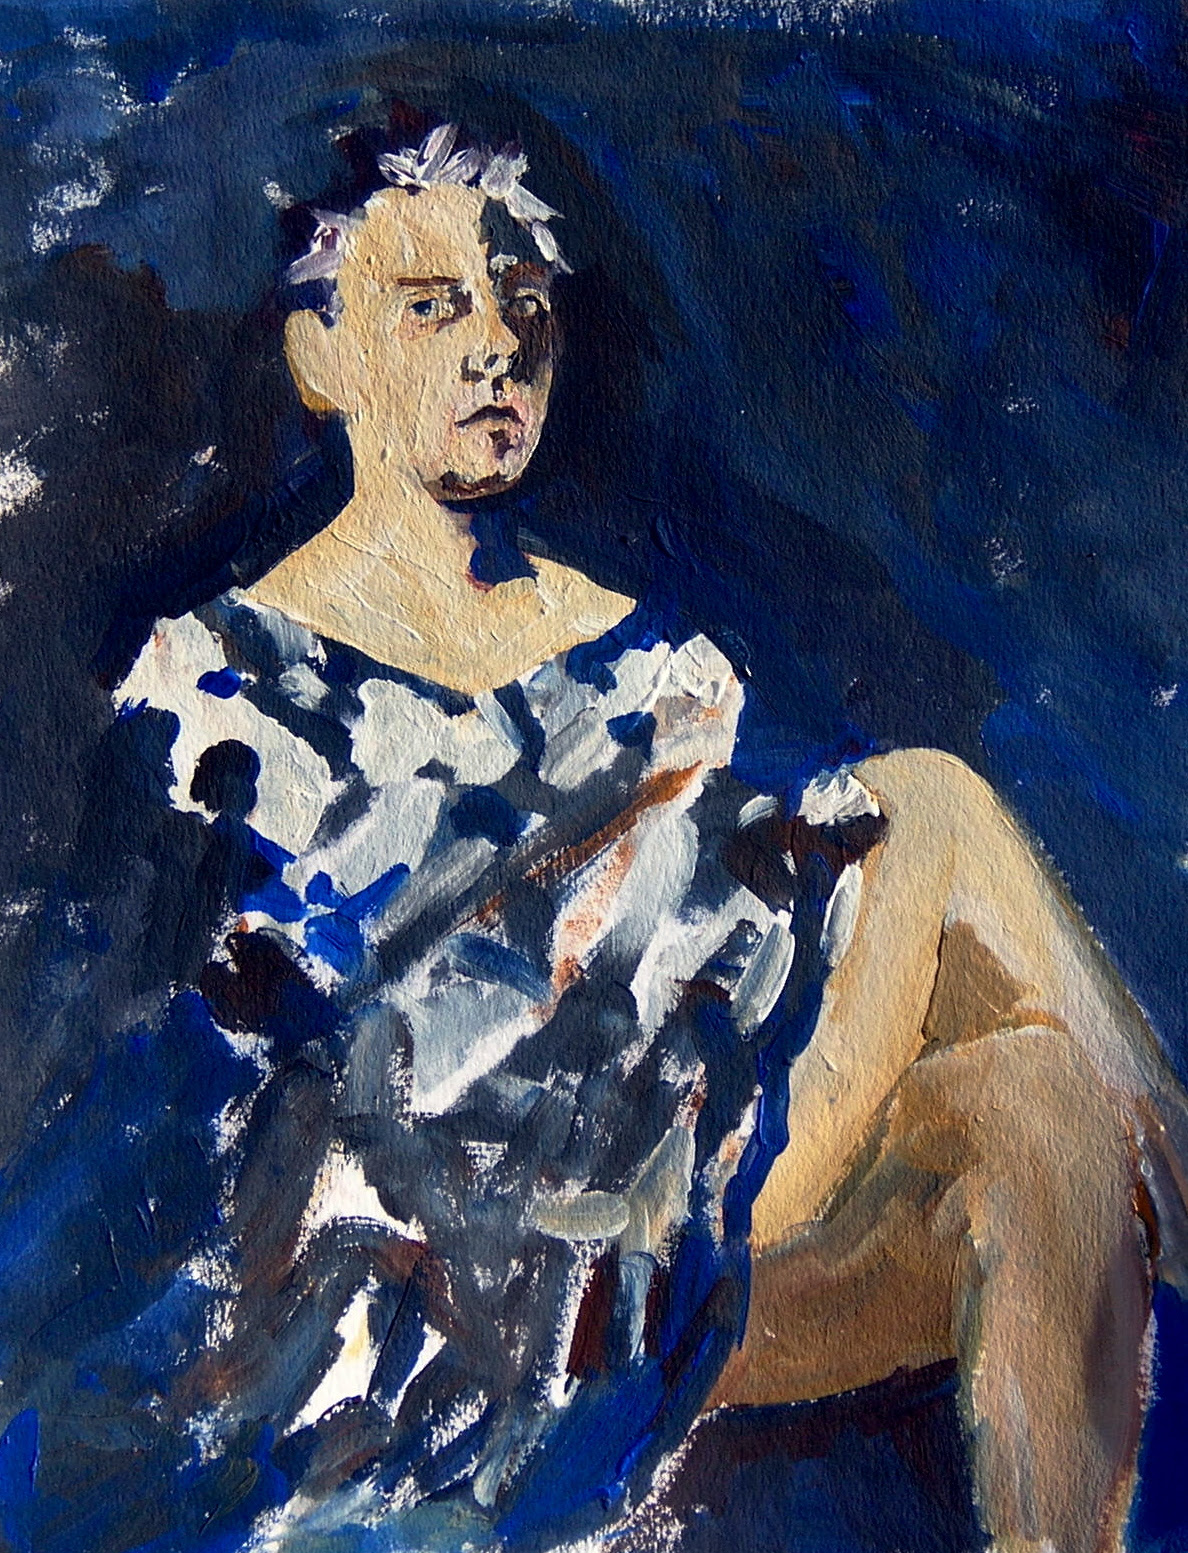 A painting of a woman wearing a white, blue, and grey dress, her expression somewhat solemn and forelorn, her legs crossed. The background is a shifting blend of dark blue and black.